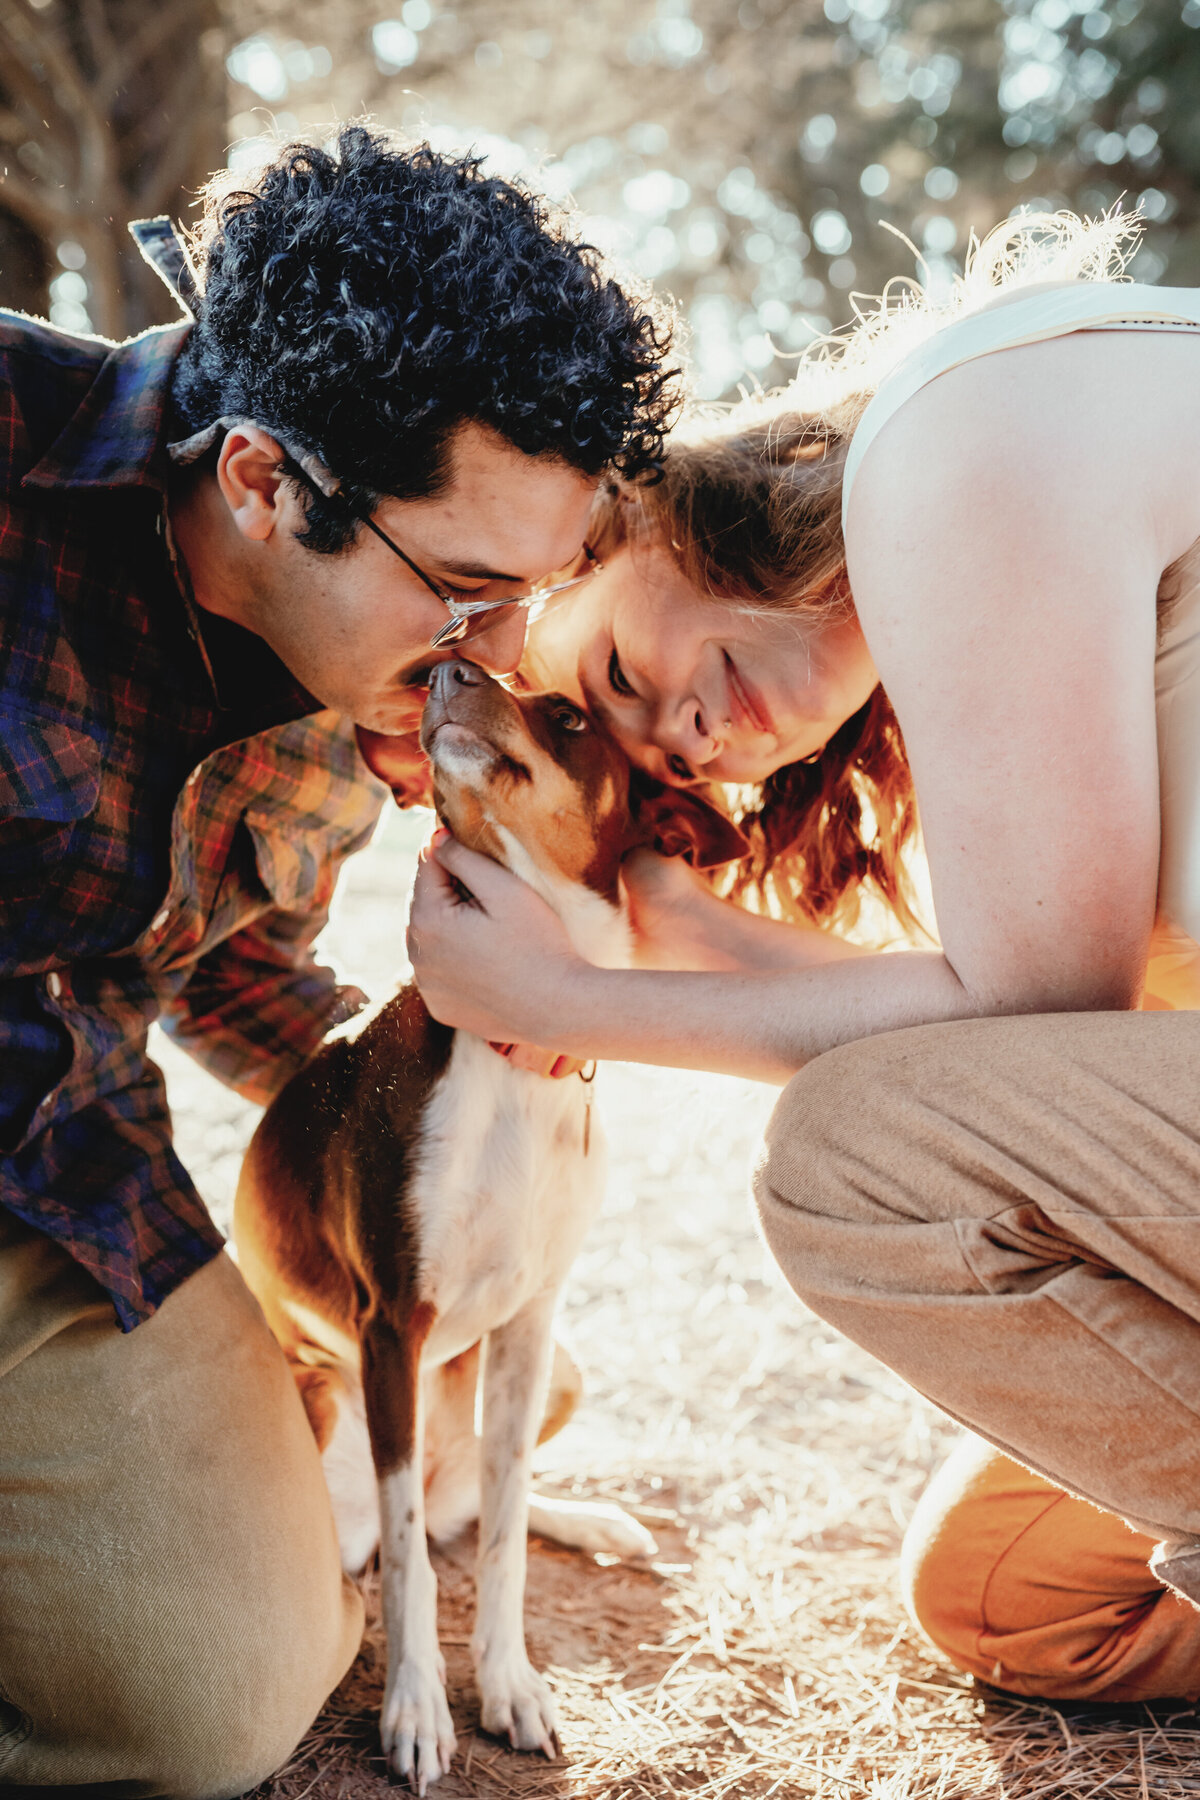 Enchanting engagement photoshoot during golden hour at Lighthouse Park, Santa Cruz, featuring a joyful couple sharing a tender moment with their beloved dog